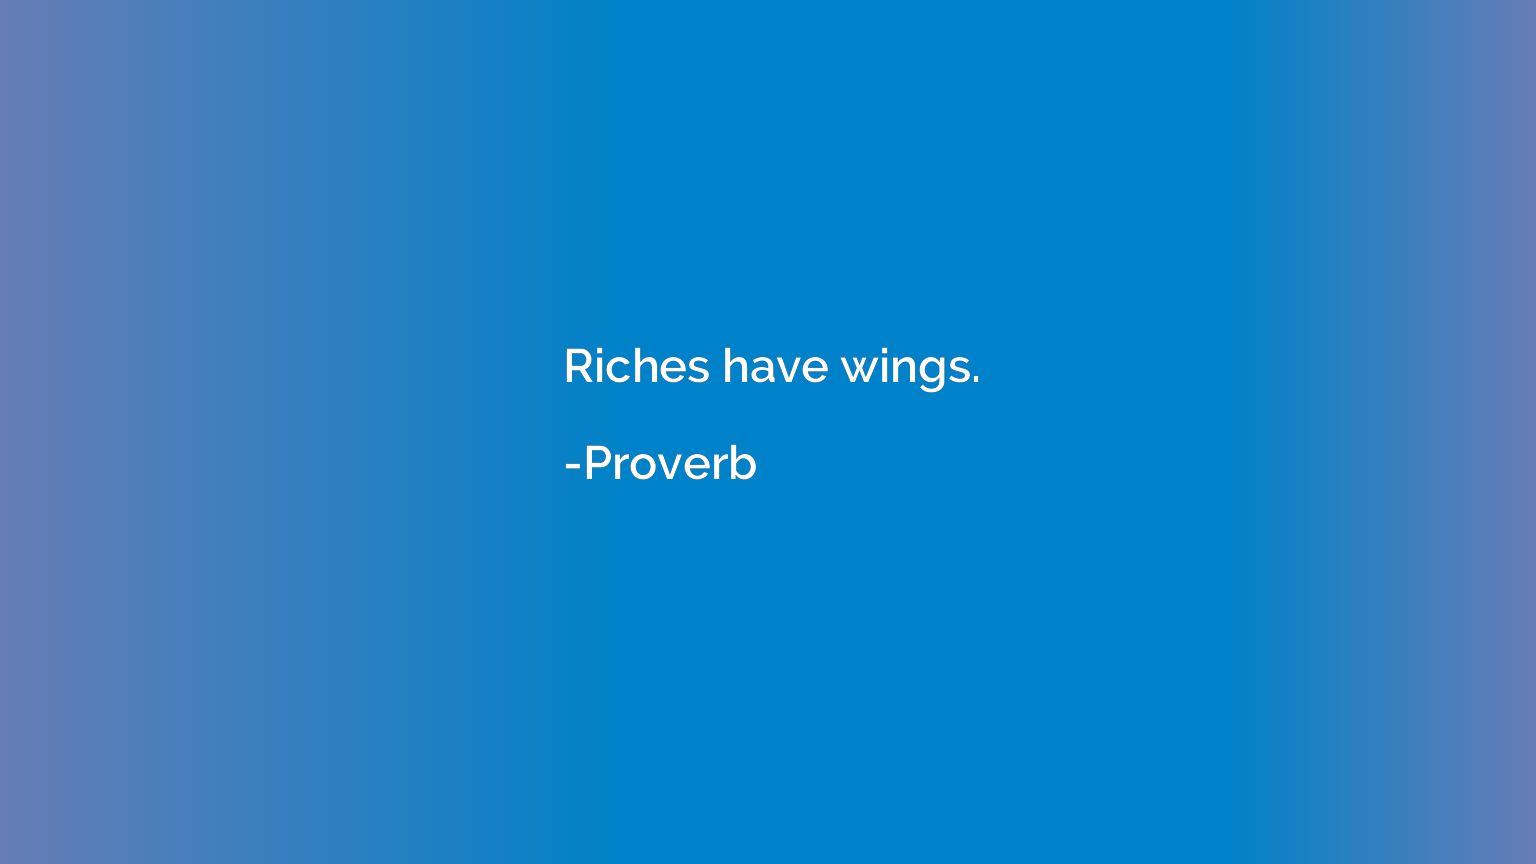 Riches have wings.